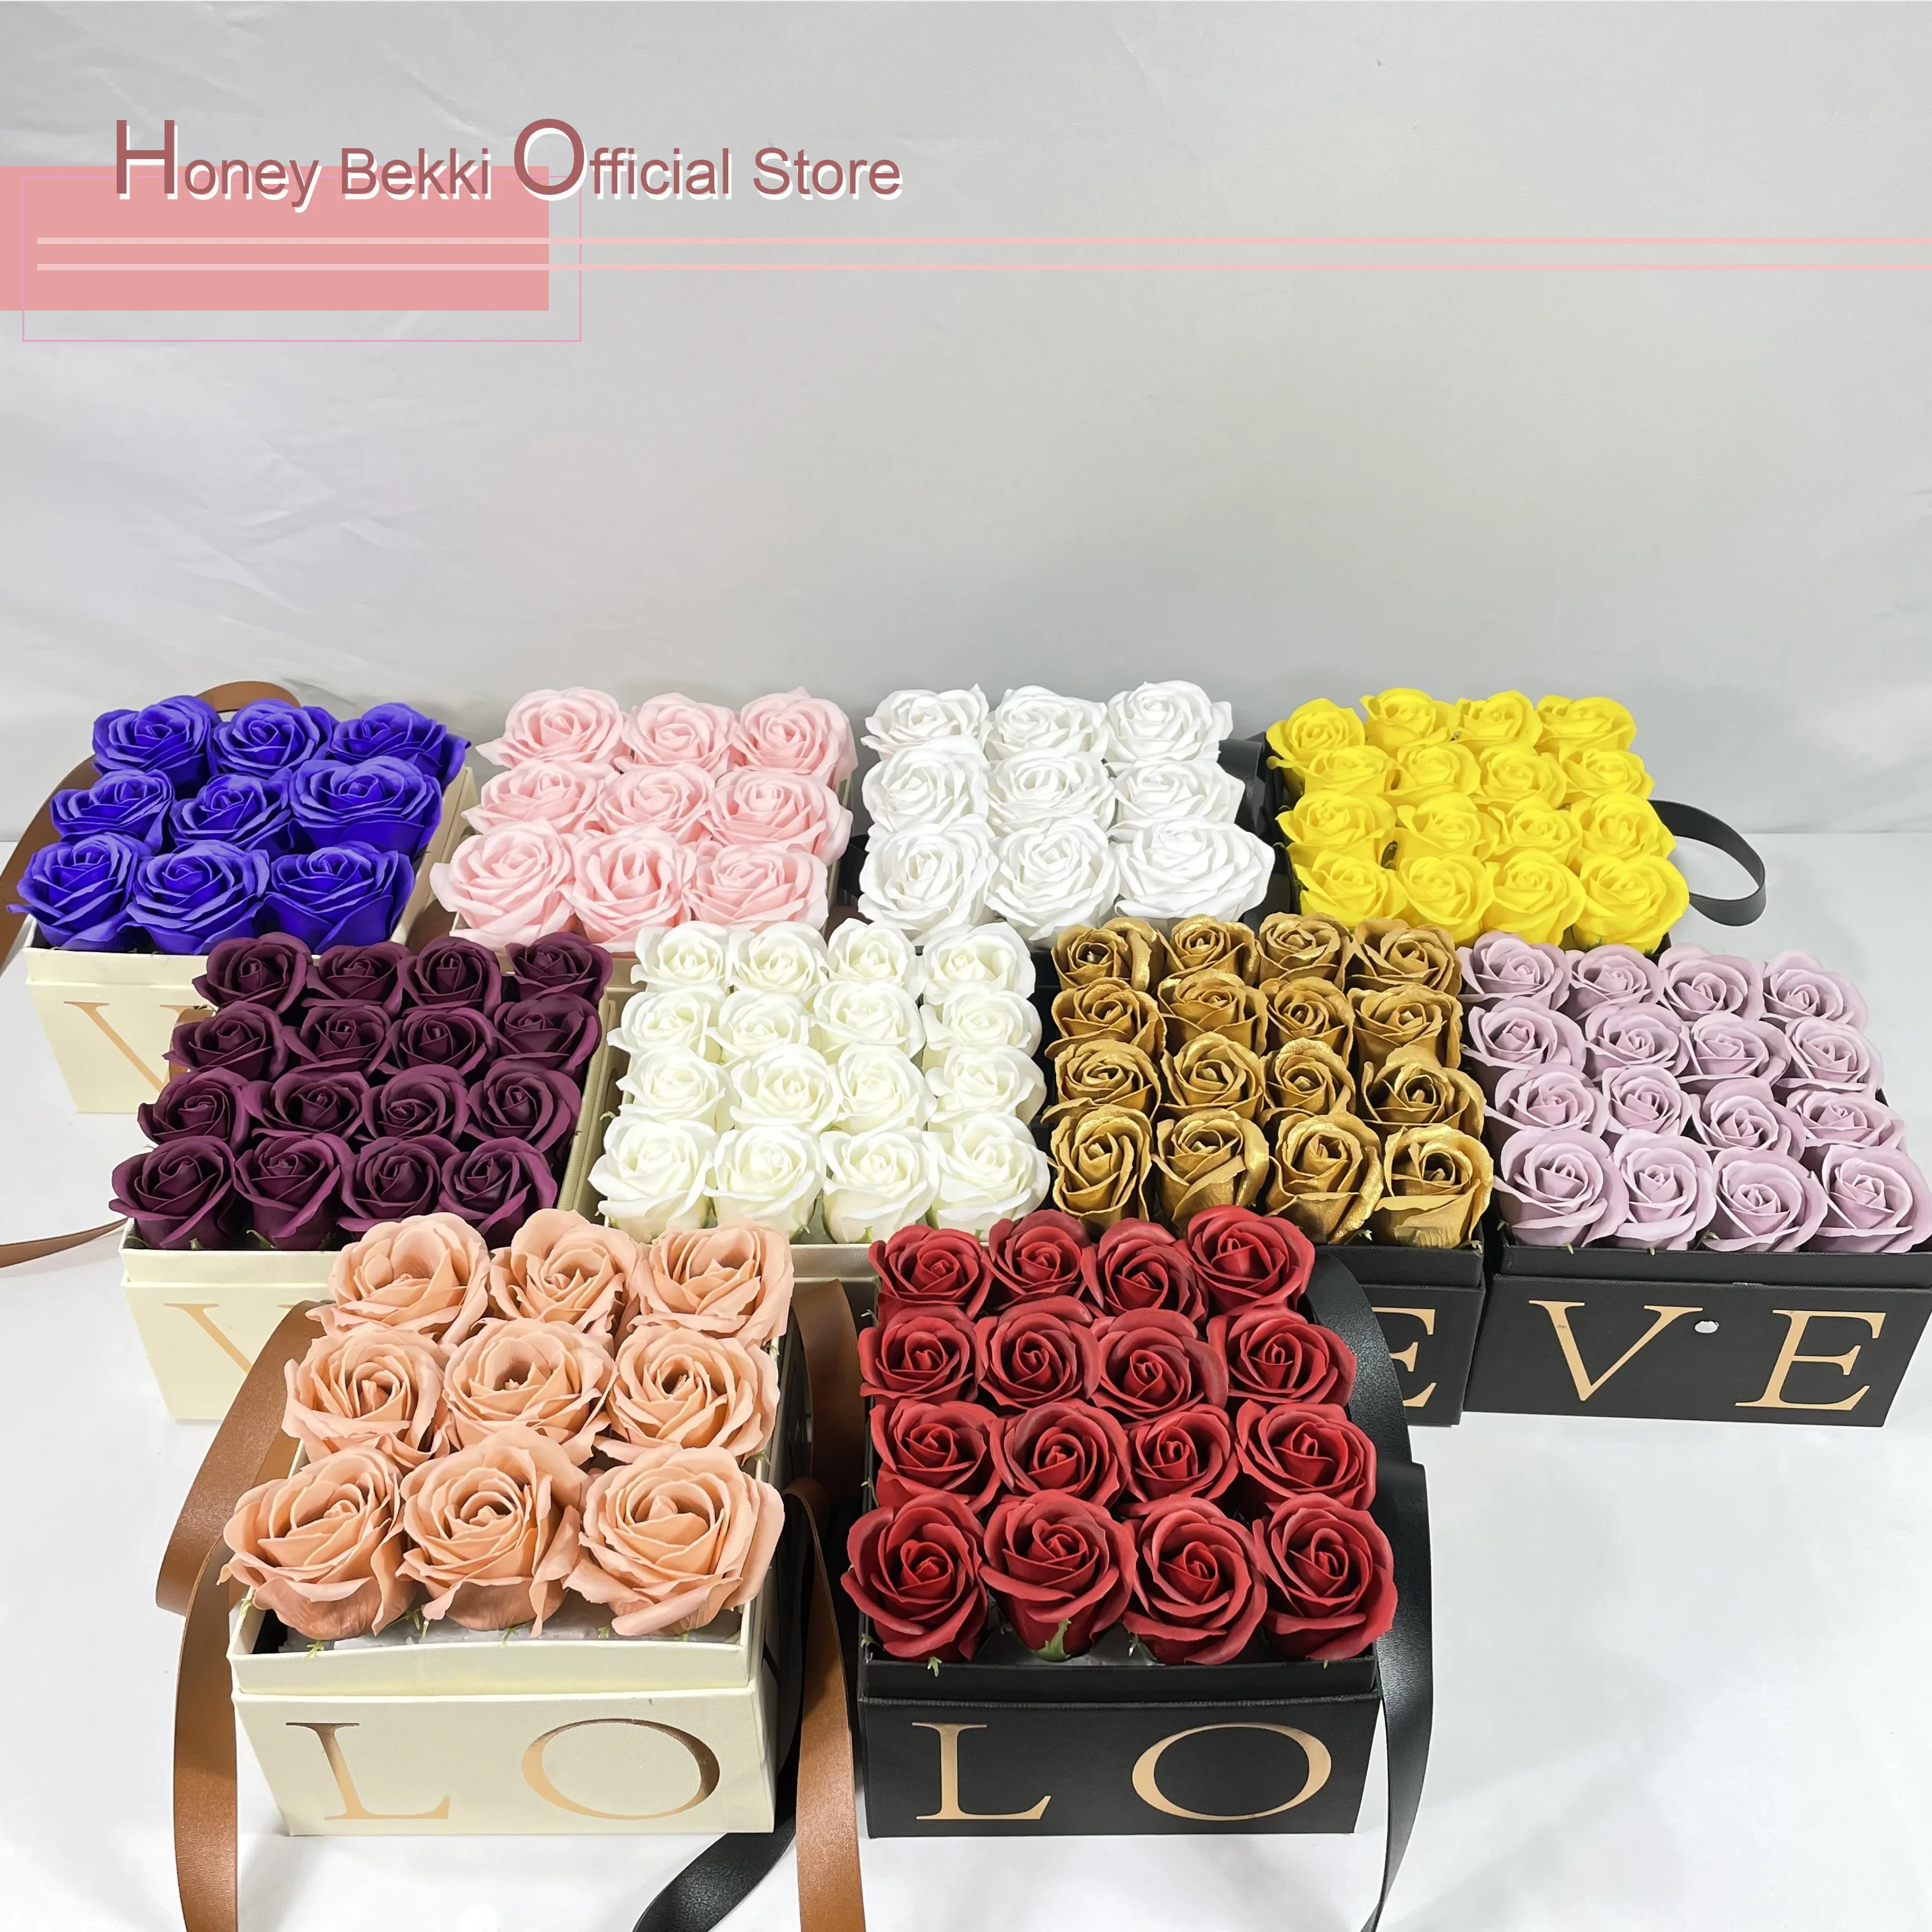 Square Eternal Rose Soap flower gift box 9/16pcs portable rose box Valentine's Day Mother's Day Wedding Gift i love you